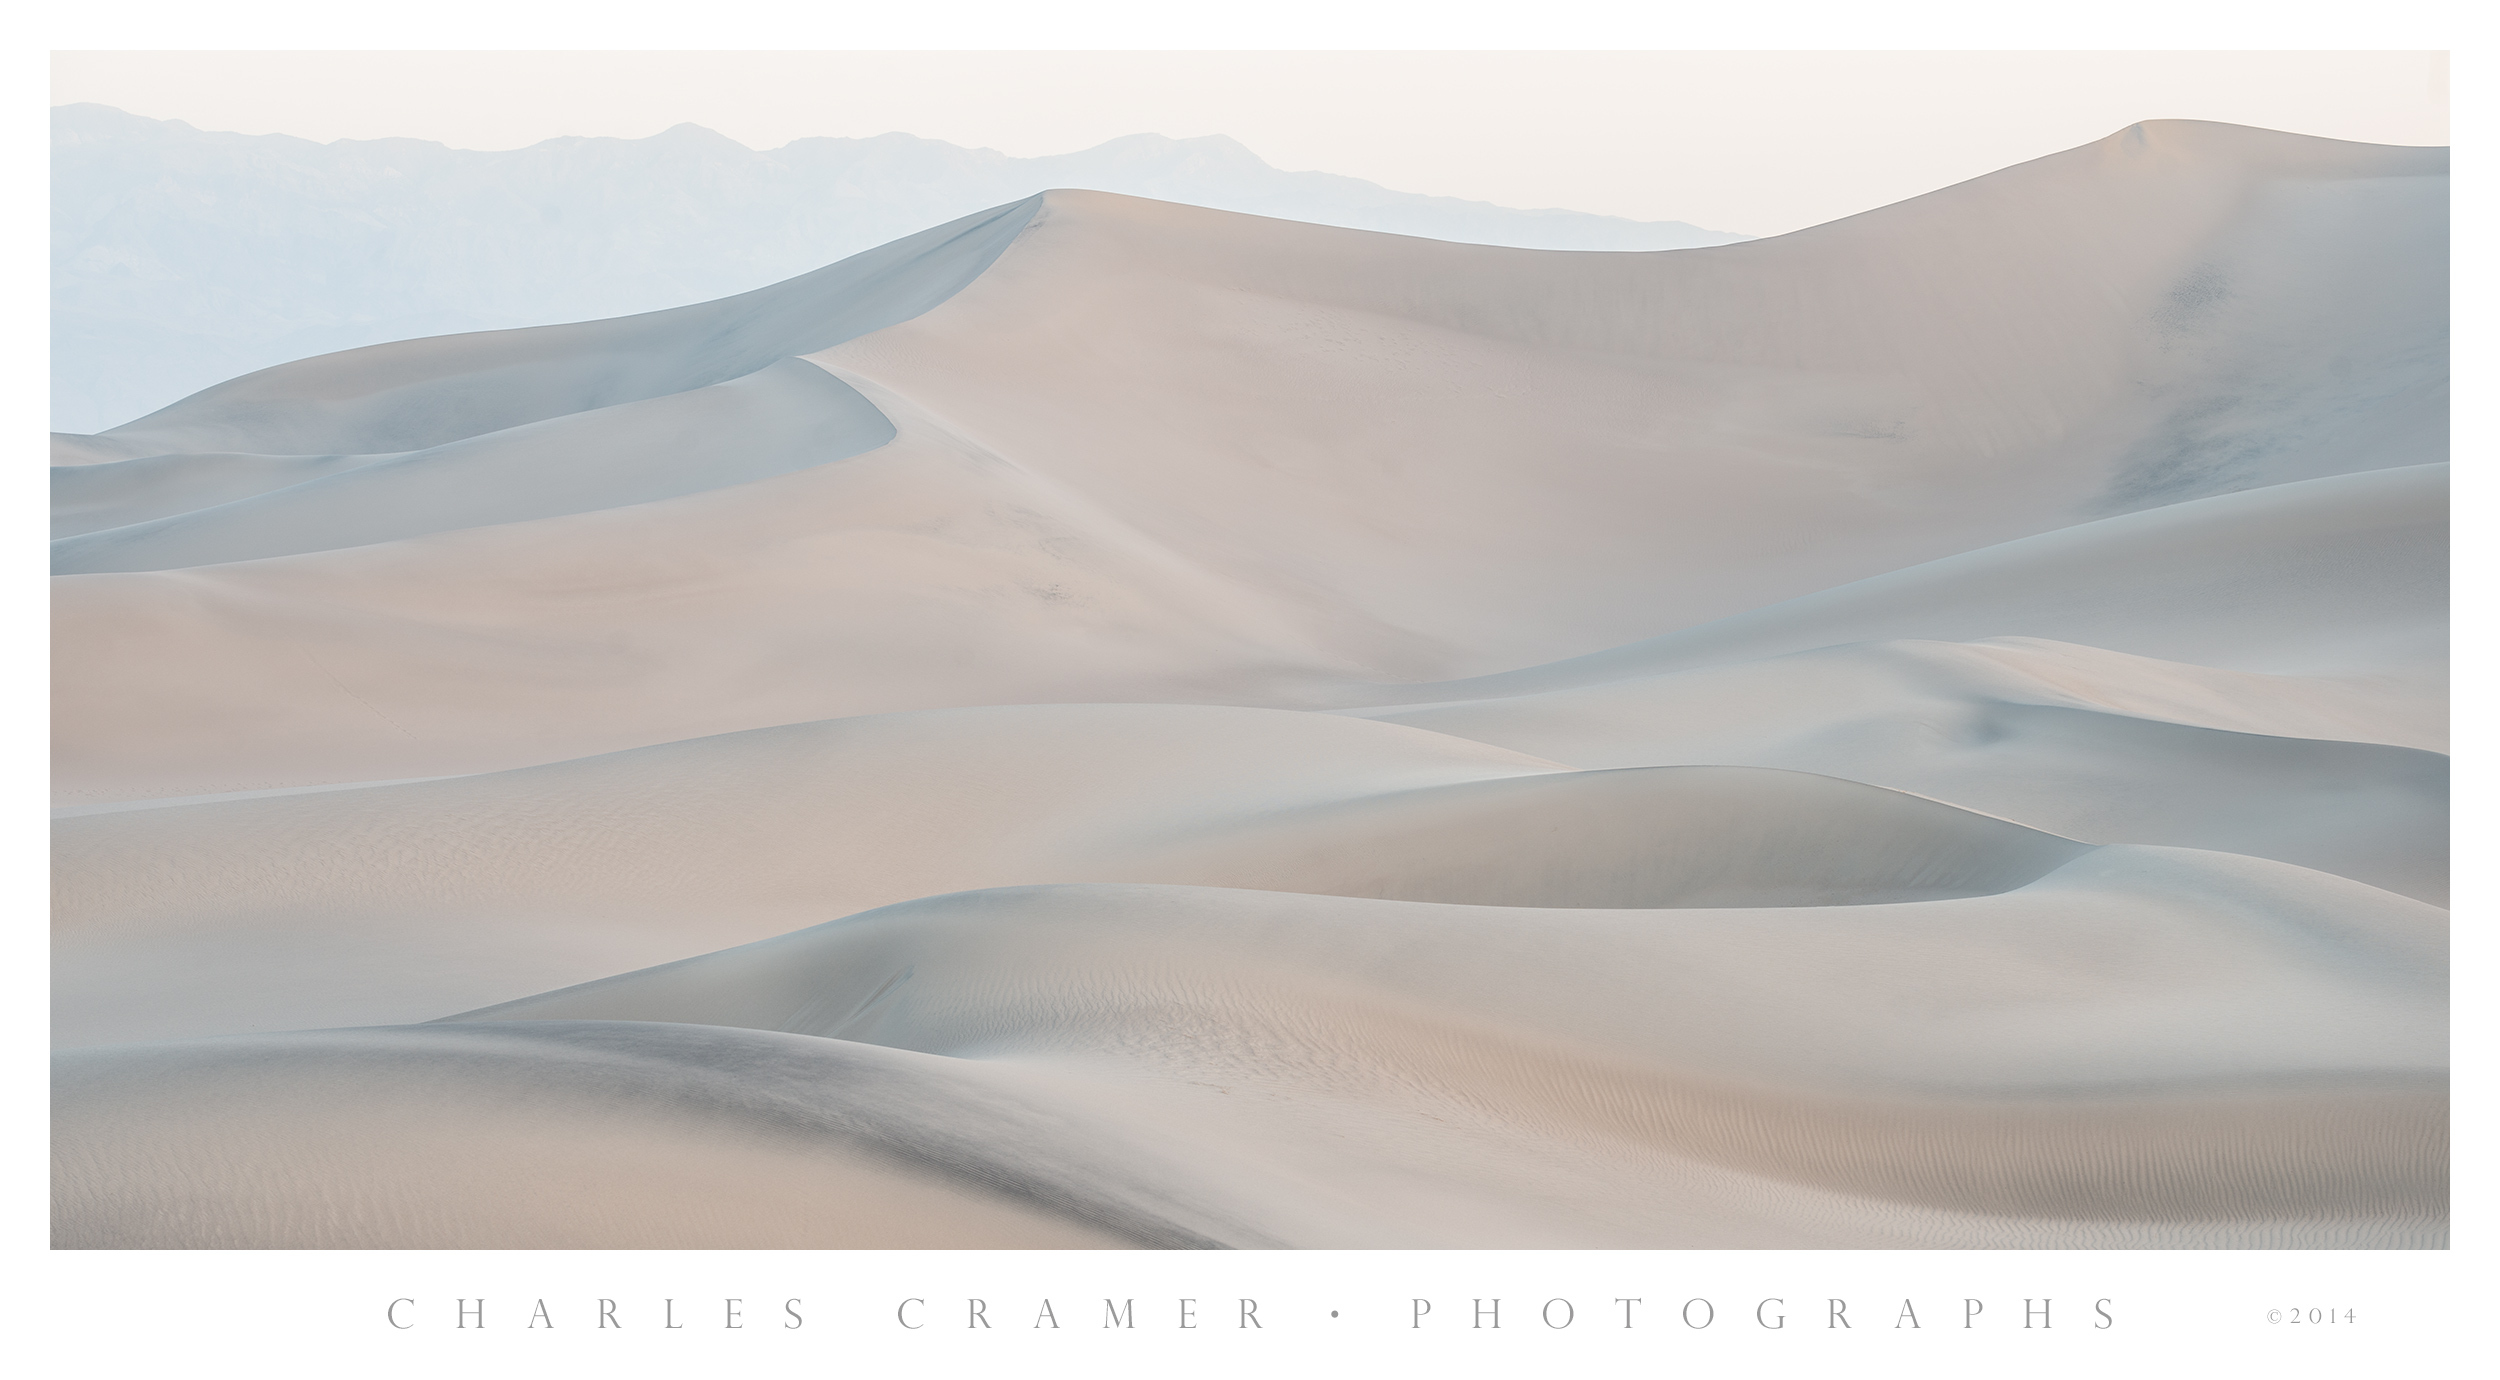 Hazy Day, Mesquite Dunes and Grapevine Mountains